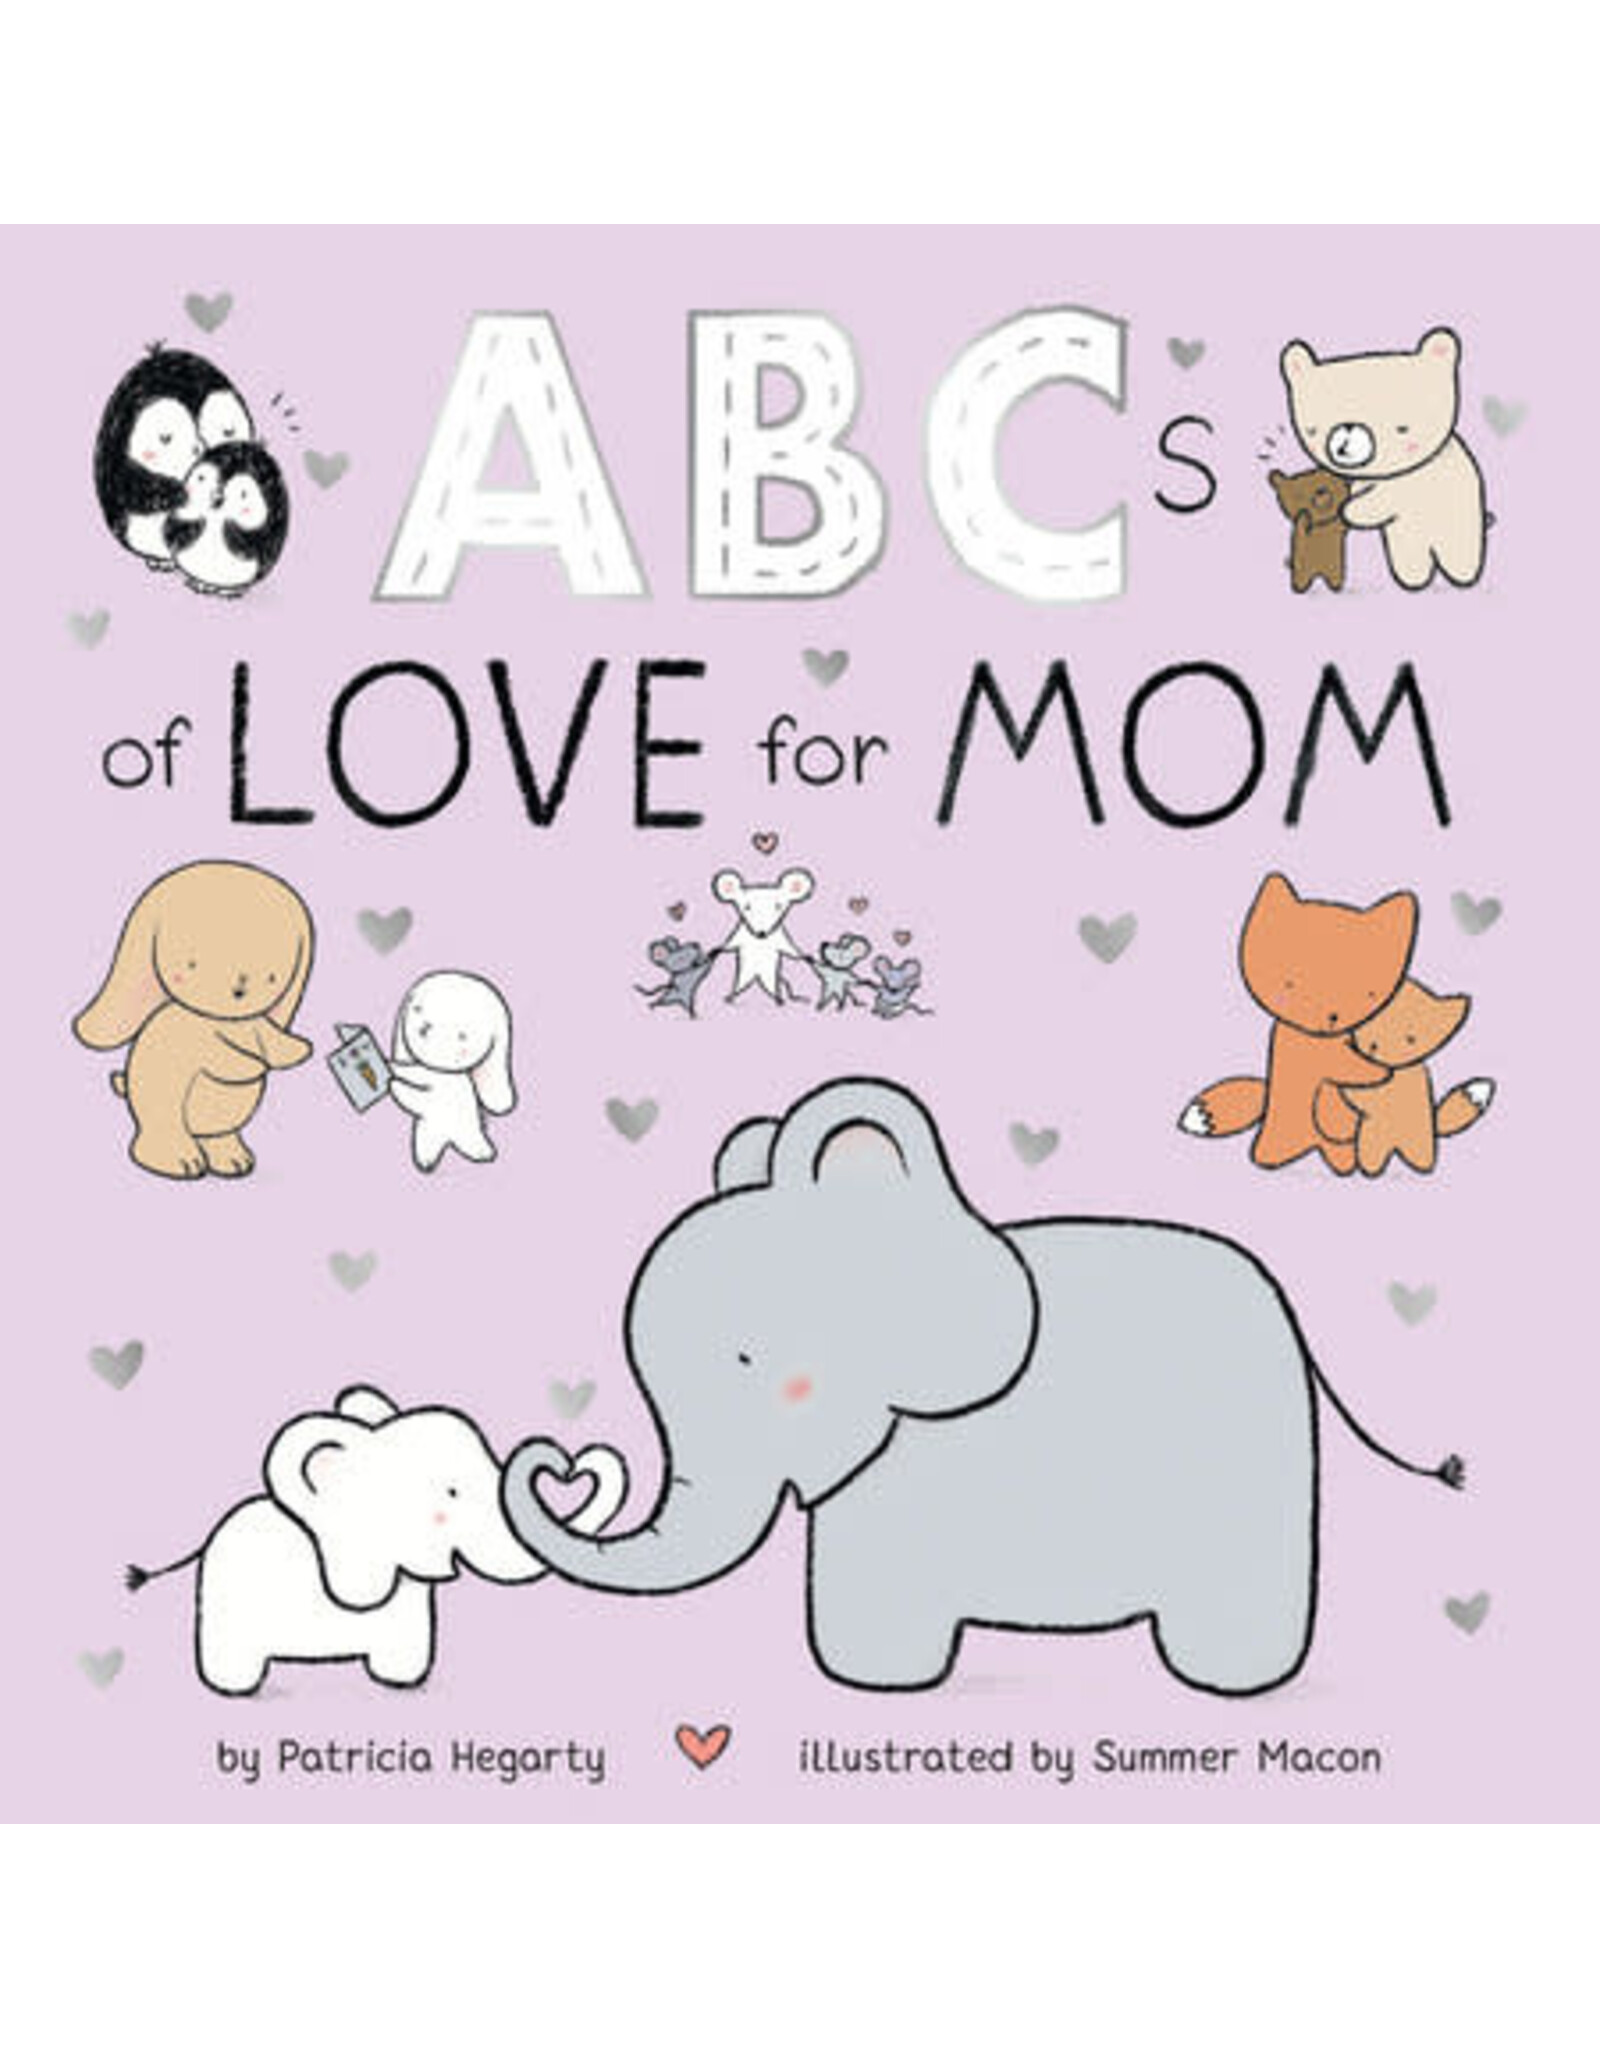 ABCs of Love for Mom